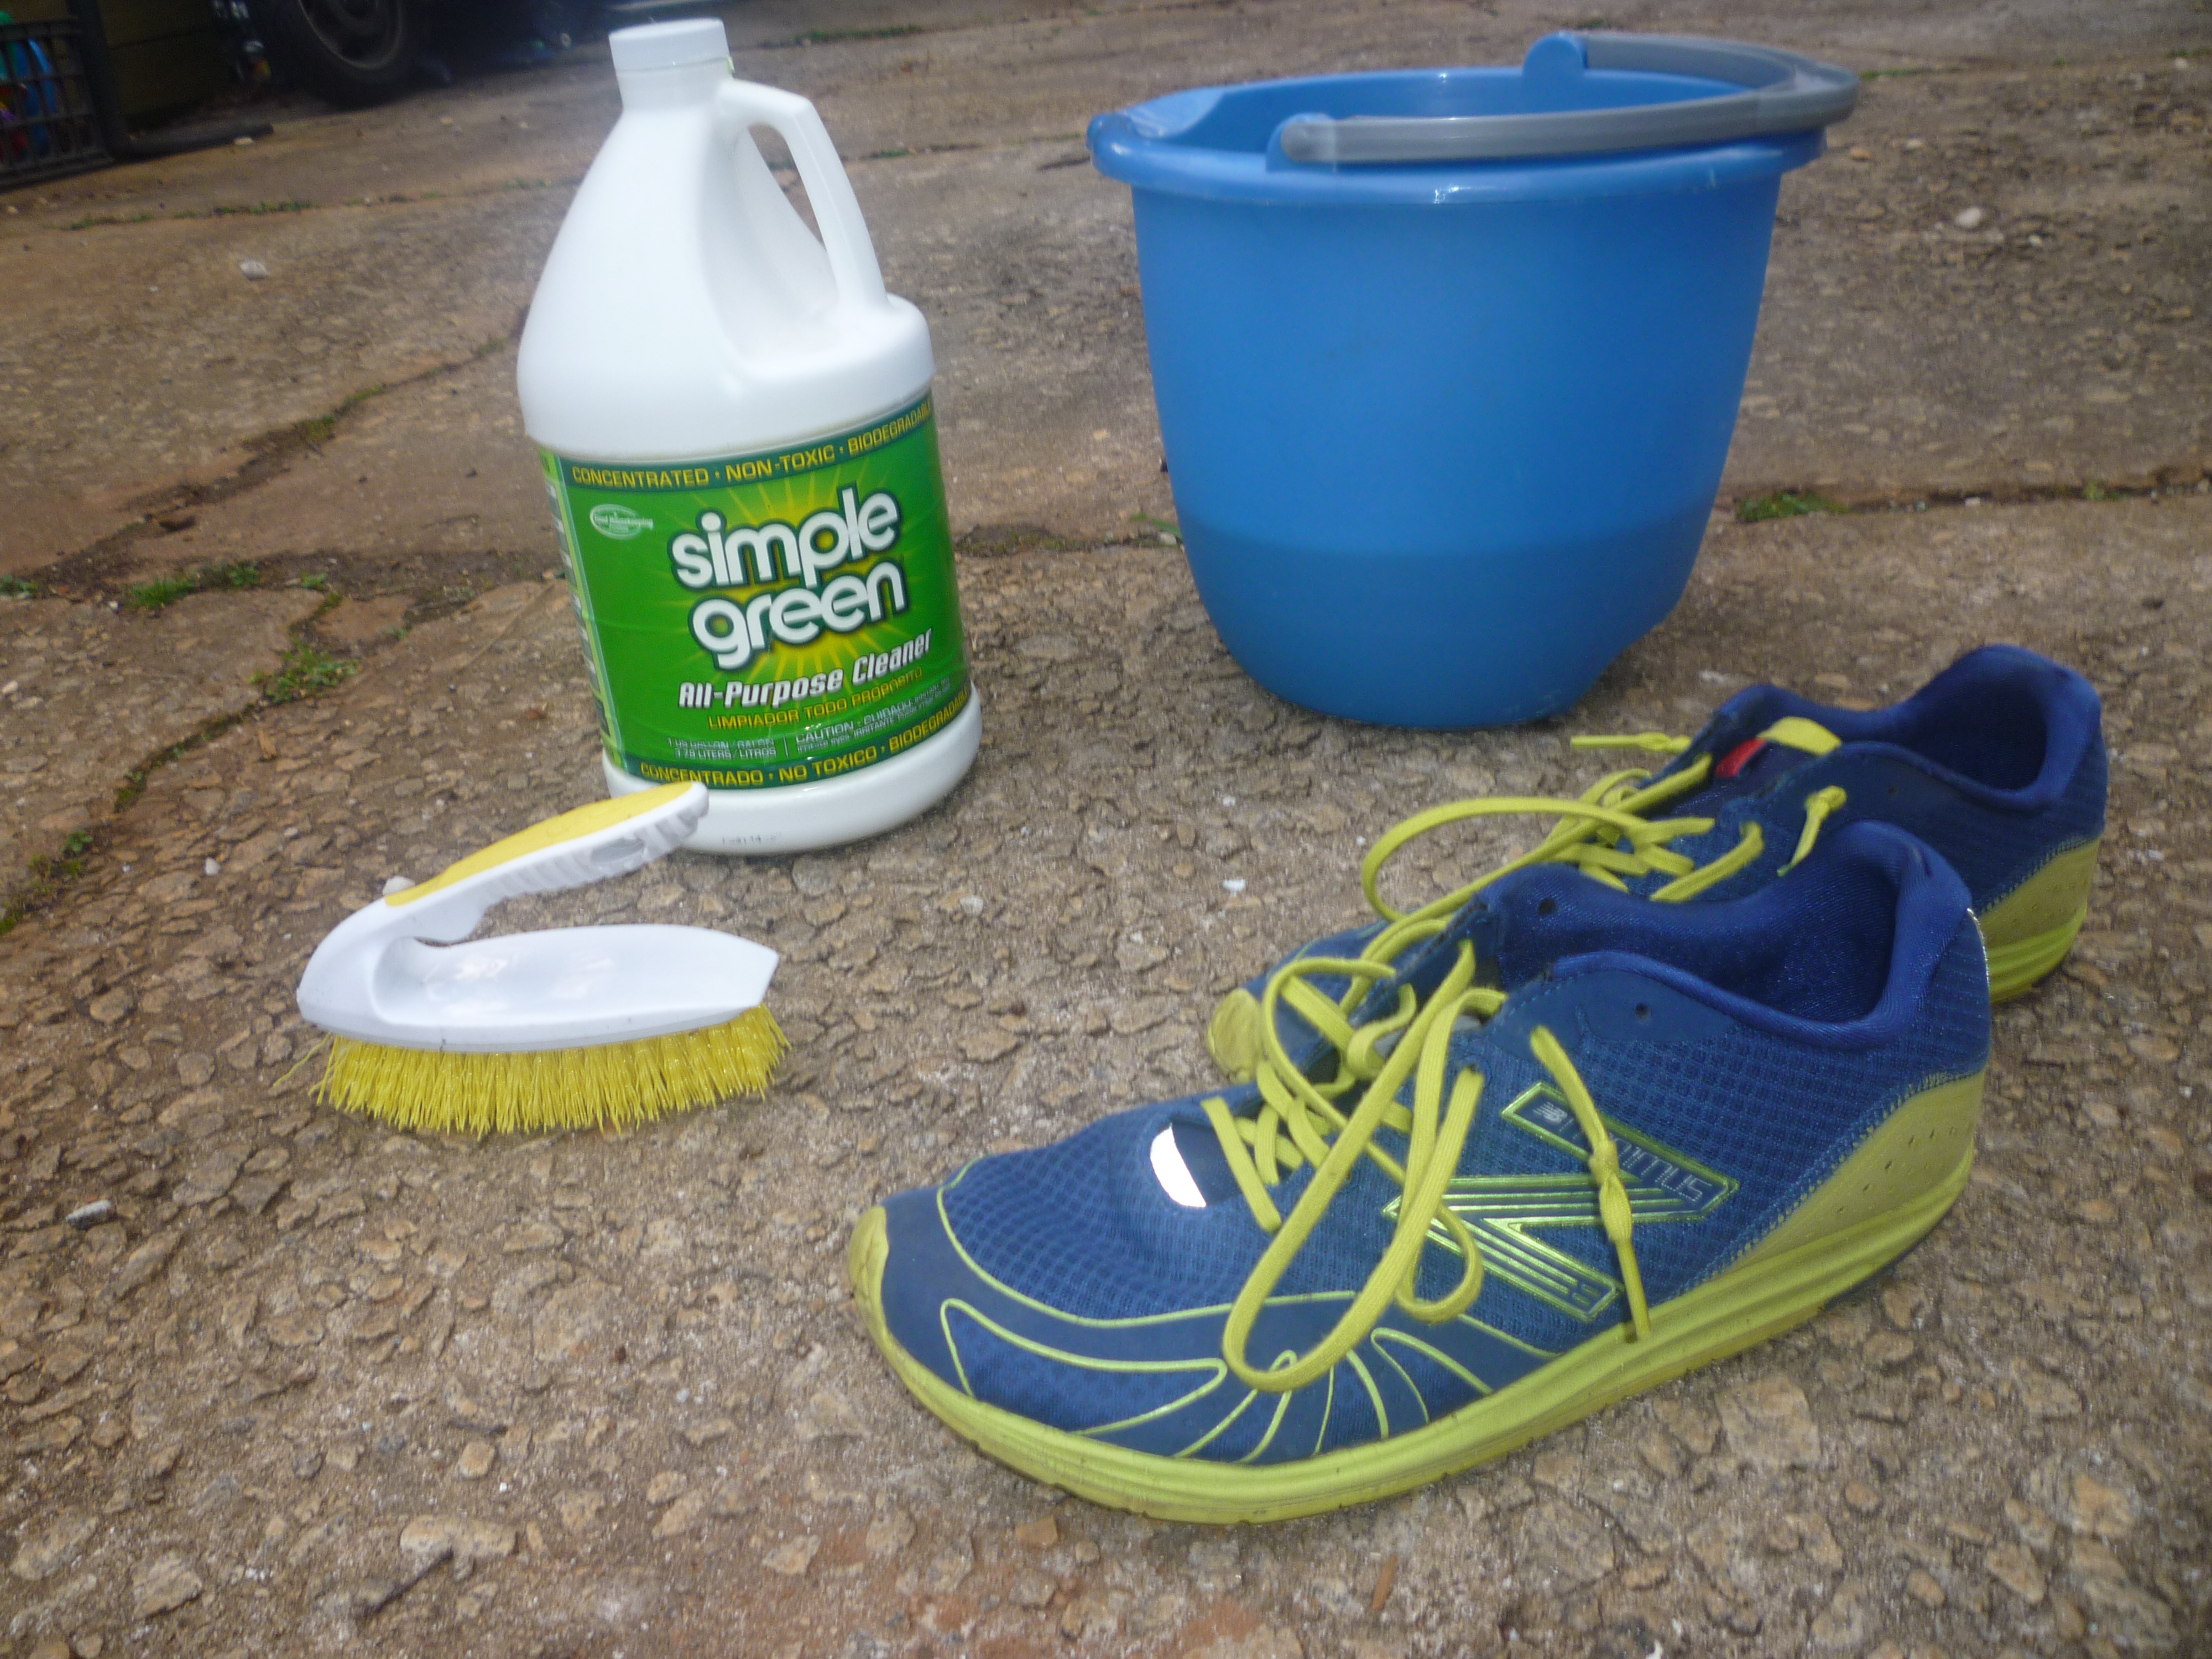 Cleaning Your Running Clothes and Gear